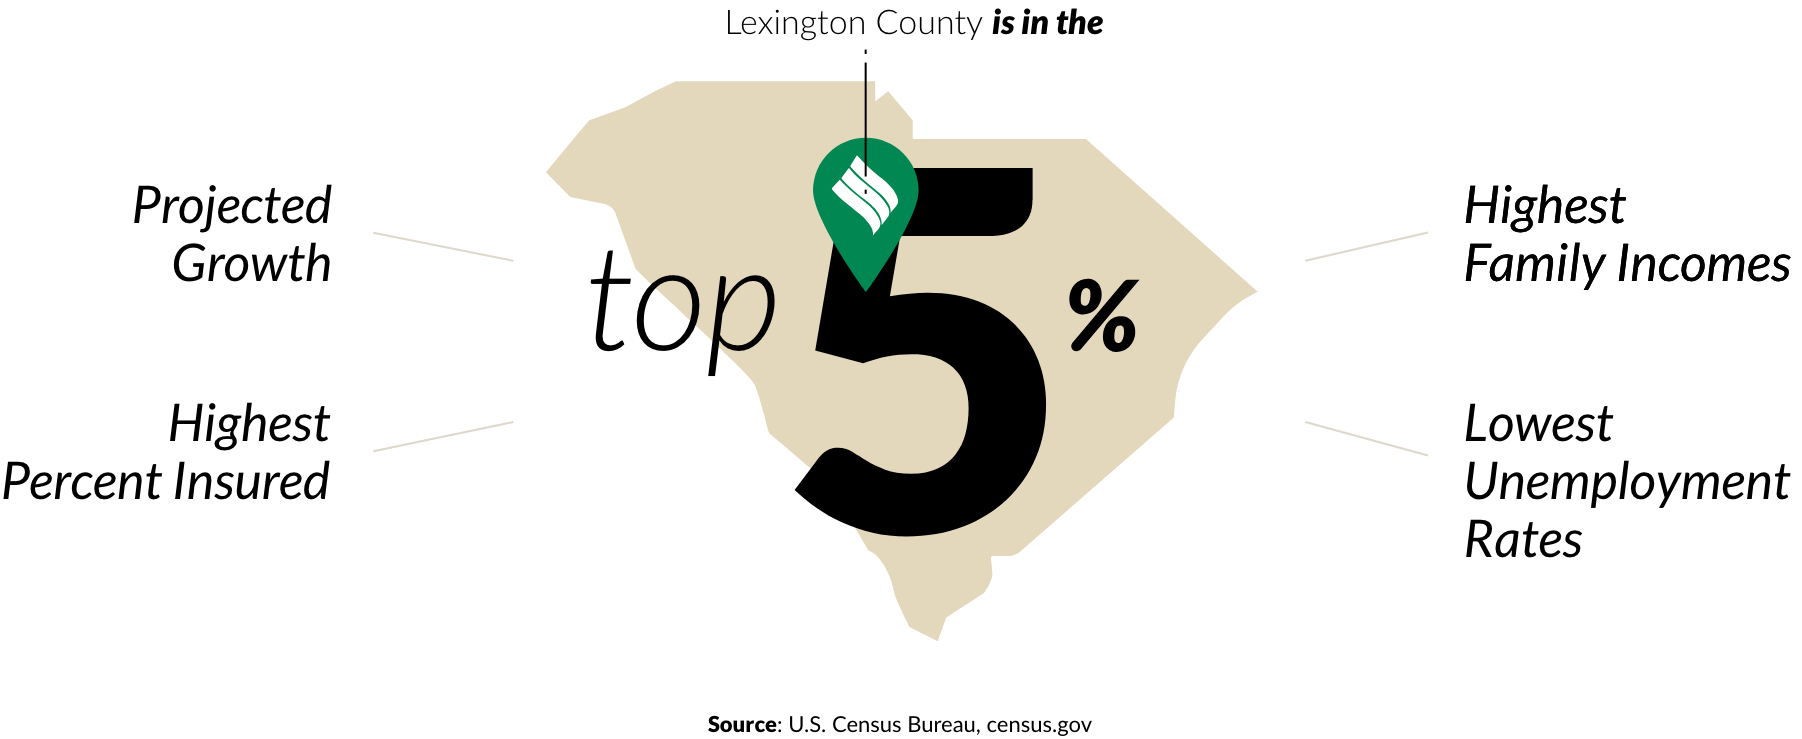 Infographic showing Lexington County as top 5% in South Carolina for projected growth, highest percent insured, lowest unemployment rates, and highest family incomes.